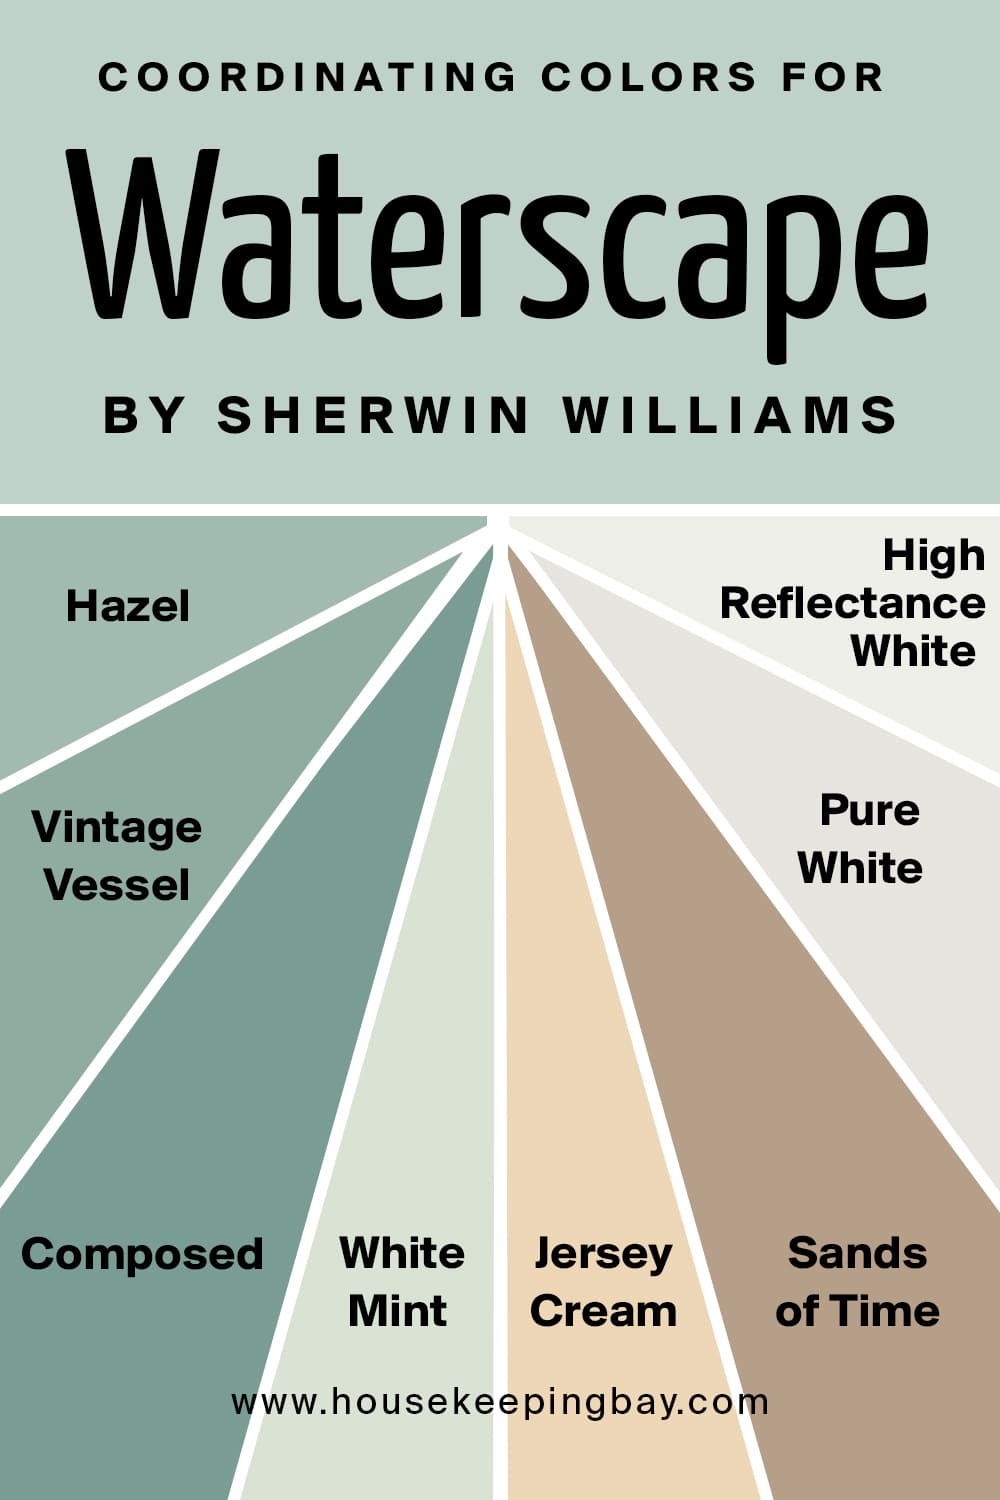 Coordinating Colors for Waterscape by Sherwin Williams